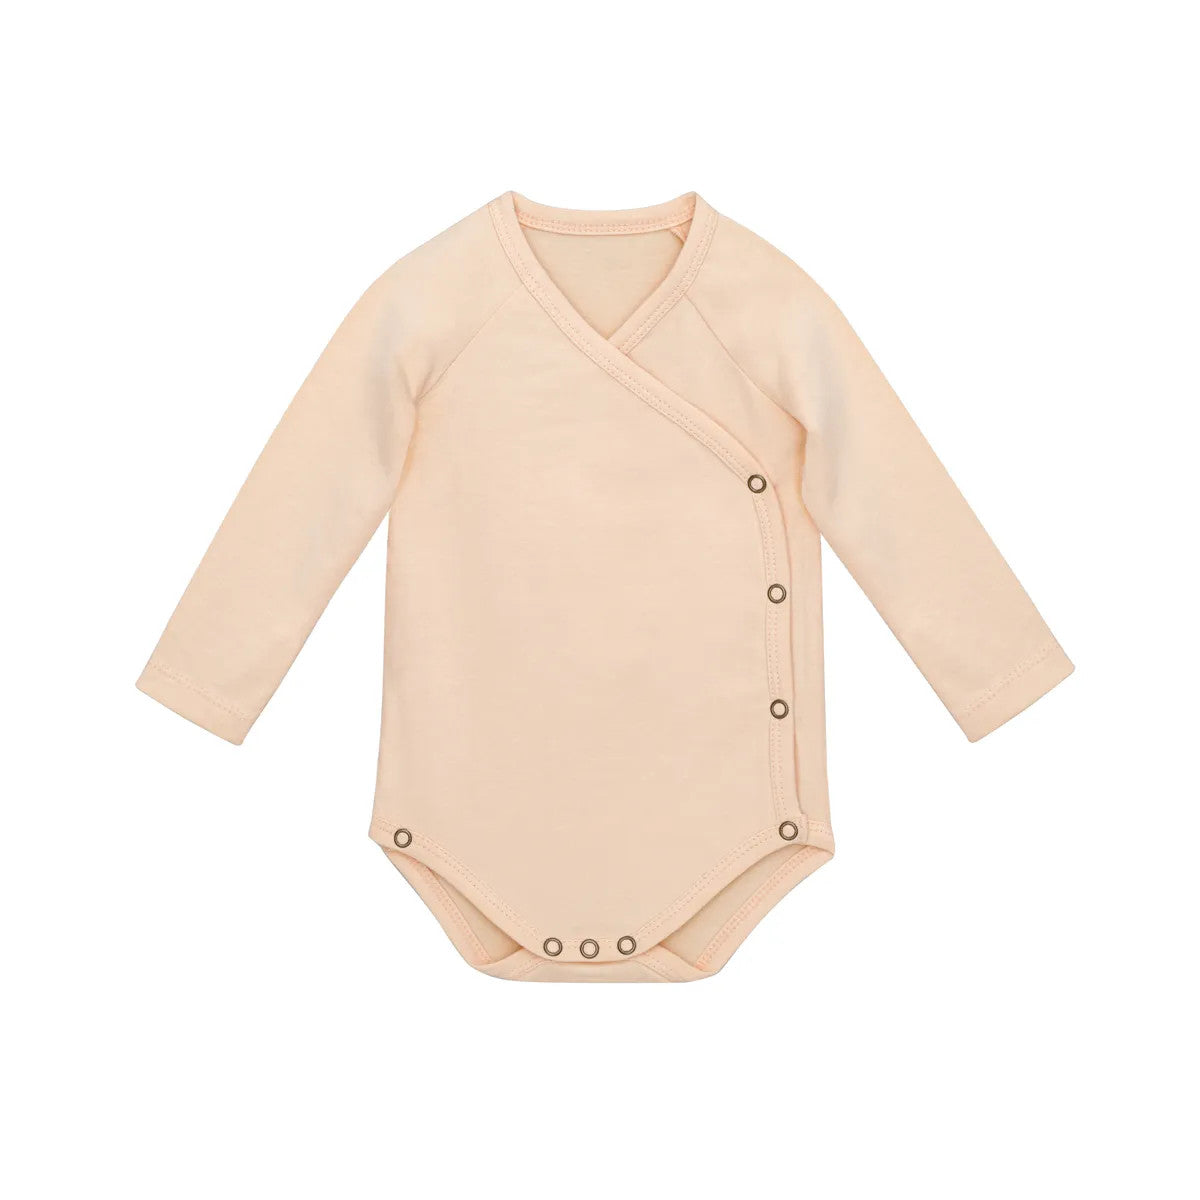 Little Hedonist unisex organic cotton baby onesie (body / romper) made from our signature organic cotton, in little peach color.